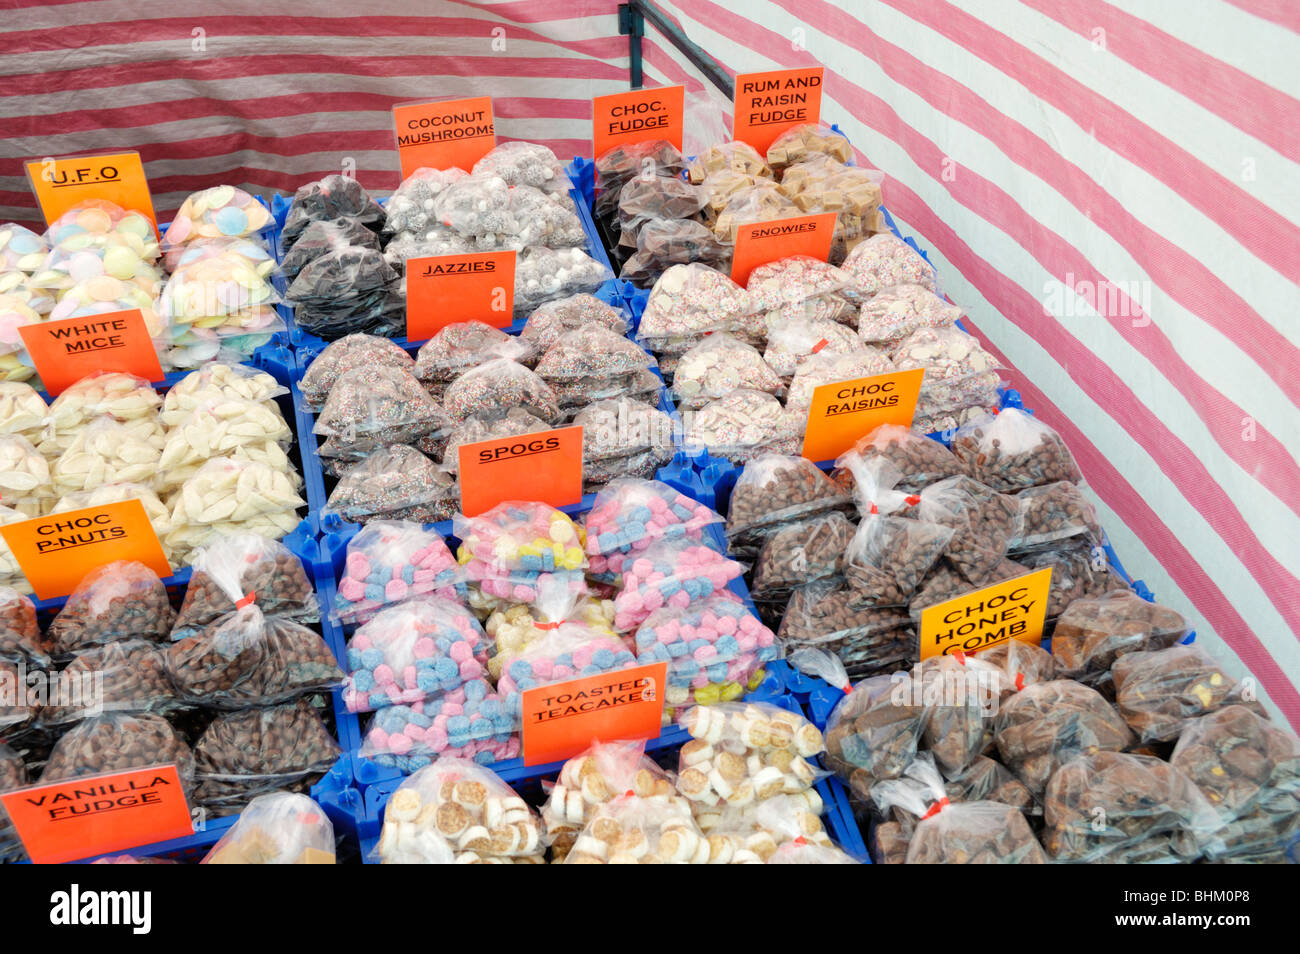 Assorted bags of sweets or candy on an English market stall in south west London, England, UK. Stock Photo